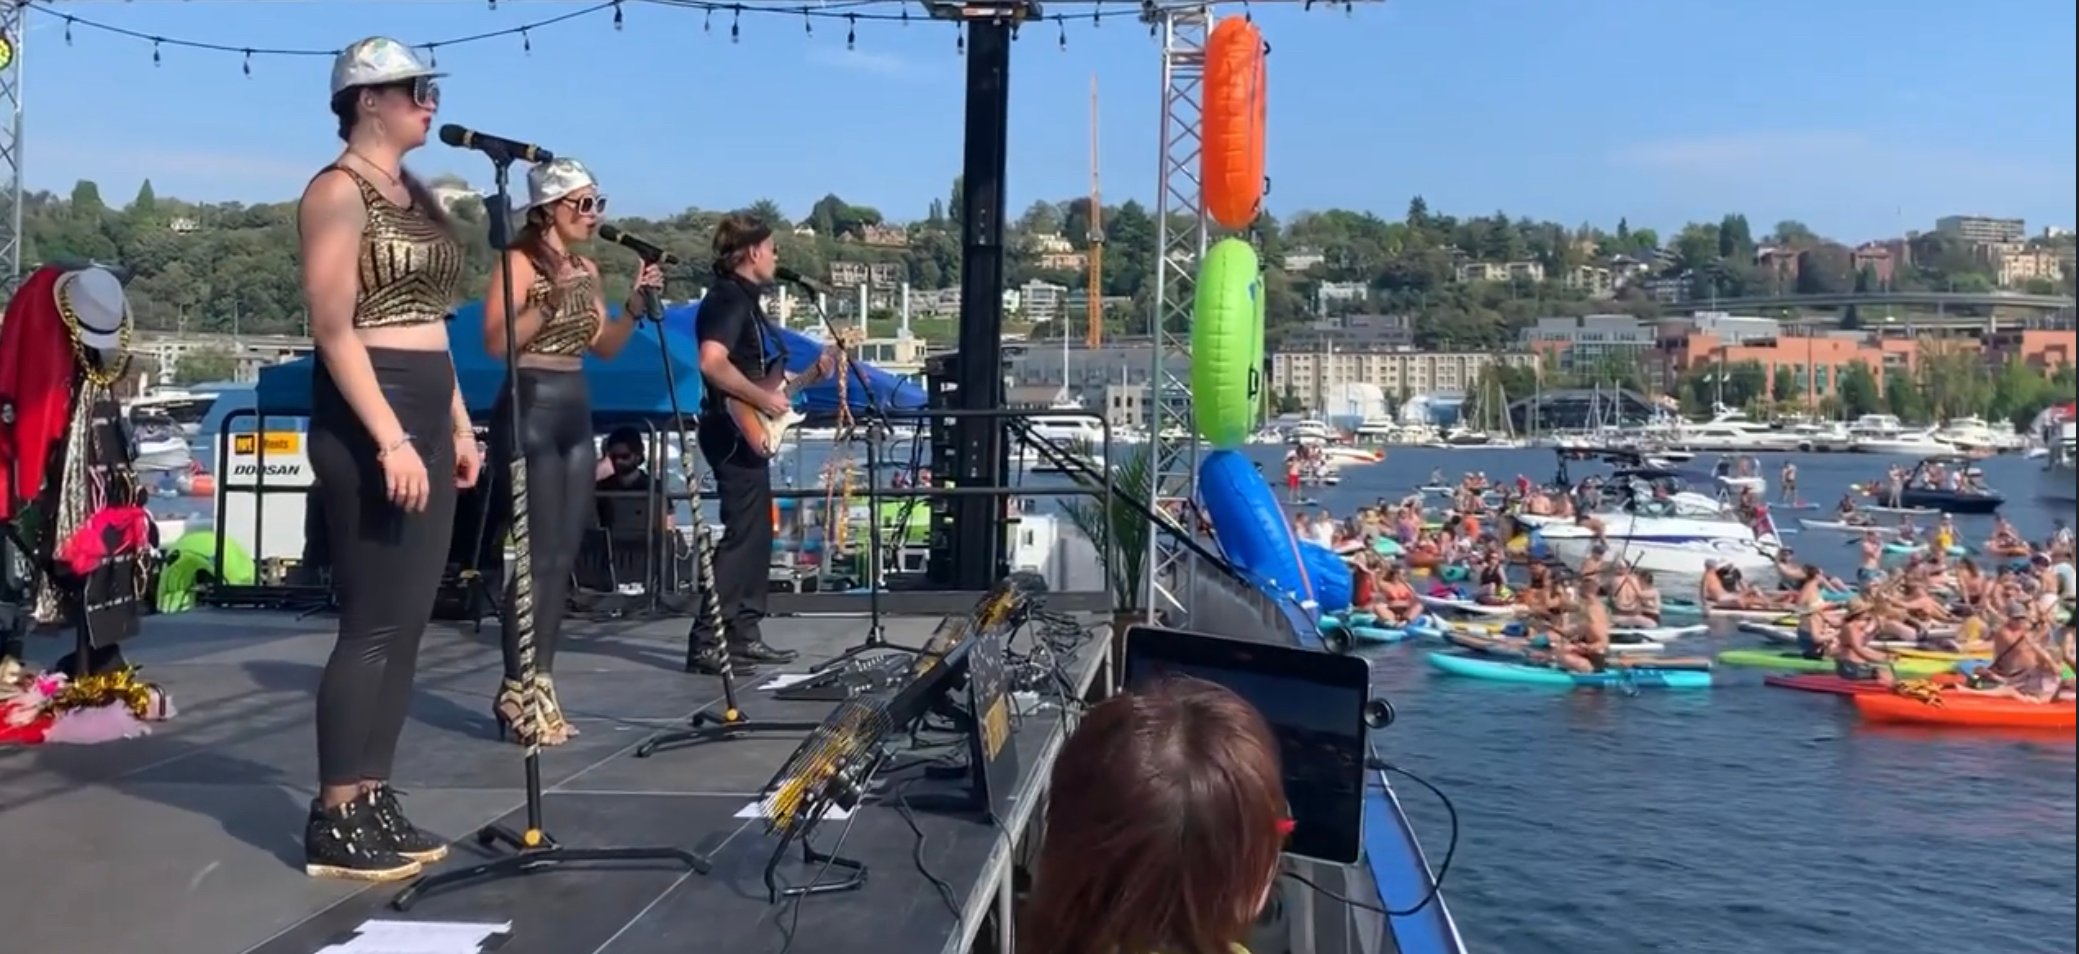 music festival on the water with paddle boards in background